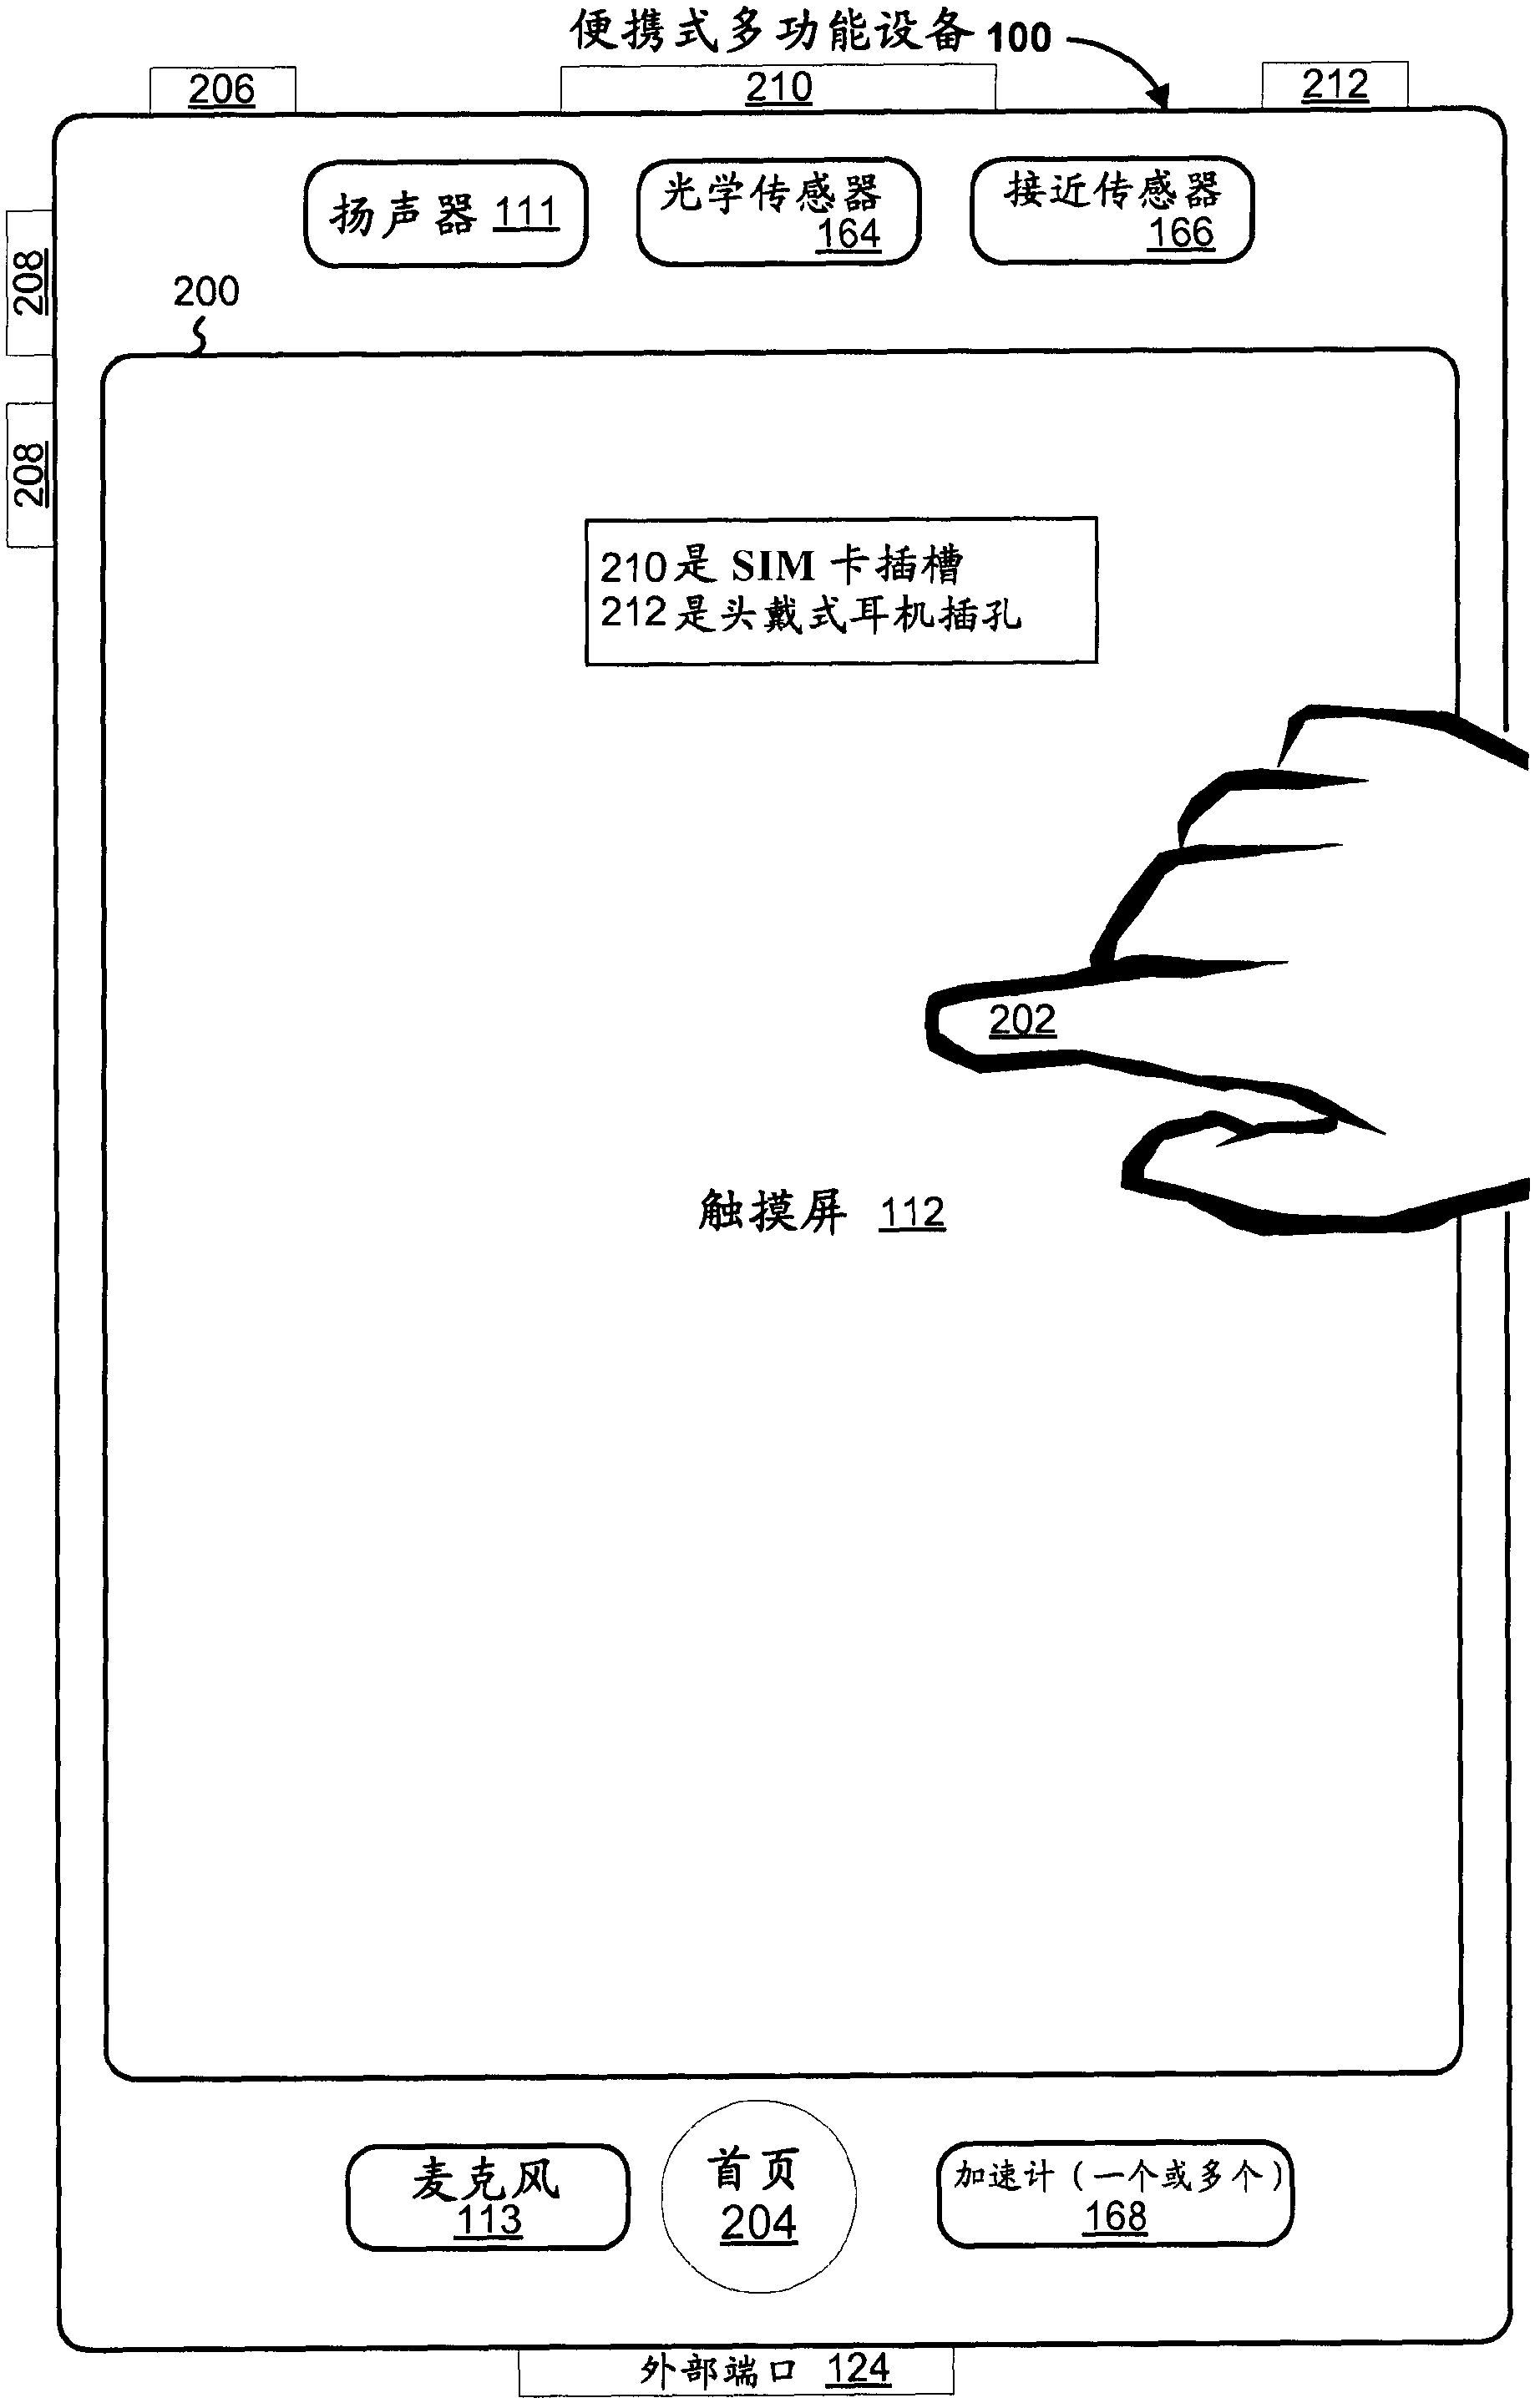 Portable touch screen device, method, and graphical user interface for using emoji characters